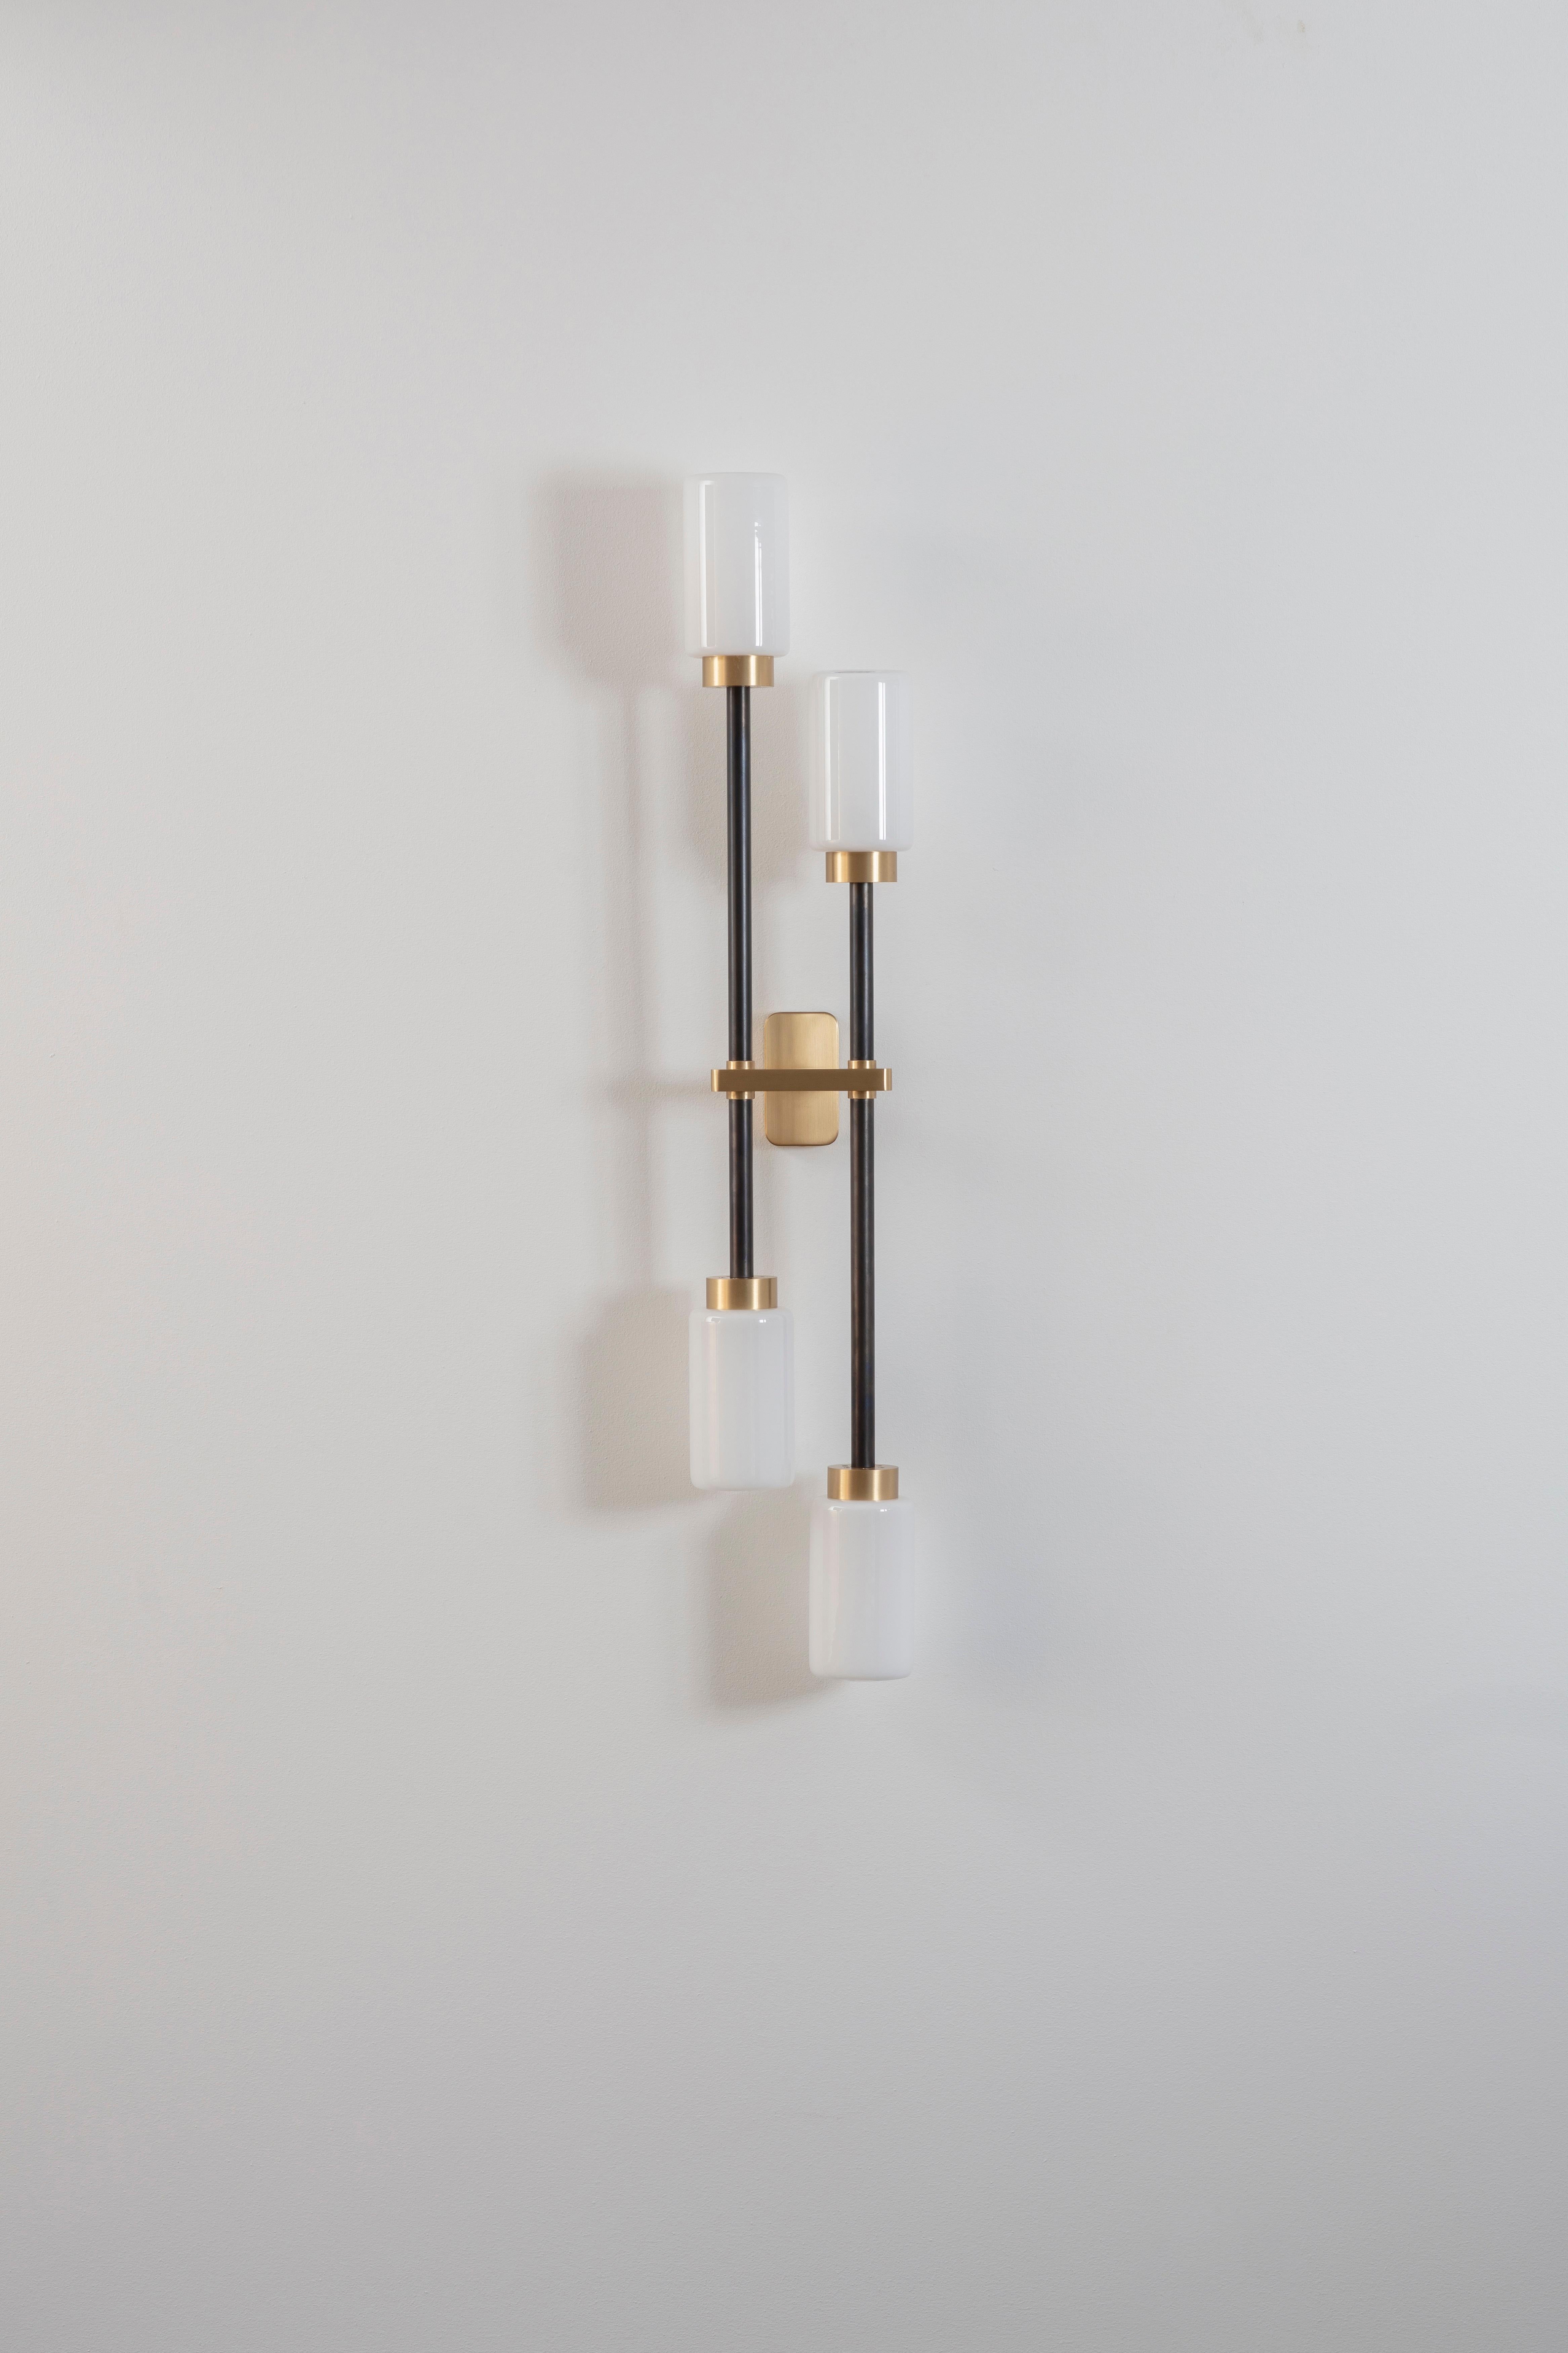 Opal Farol double wall light by Bert Frank
Dimensions: H 79 x W 15 x D 7 cm
Materials: Brass, bronze and opal

Available finishes: Bronzed brass, black brass
All our lamps can be wired according to each country. If sold to the USA it will be